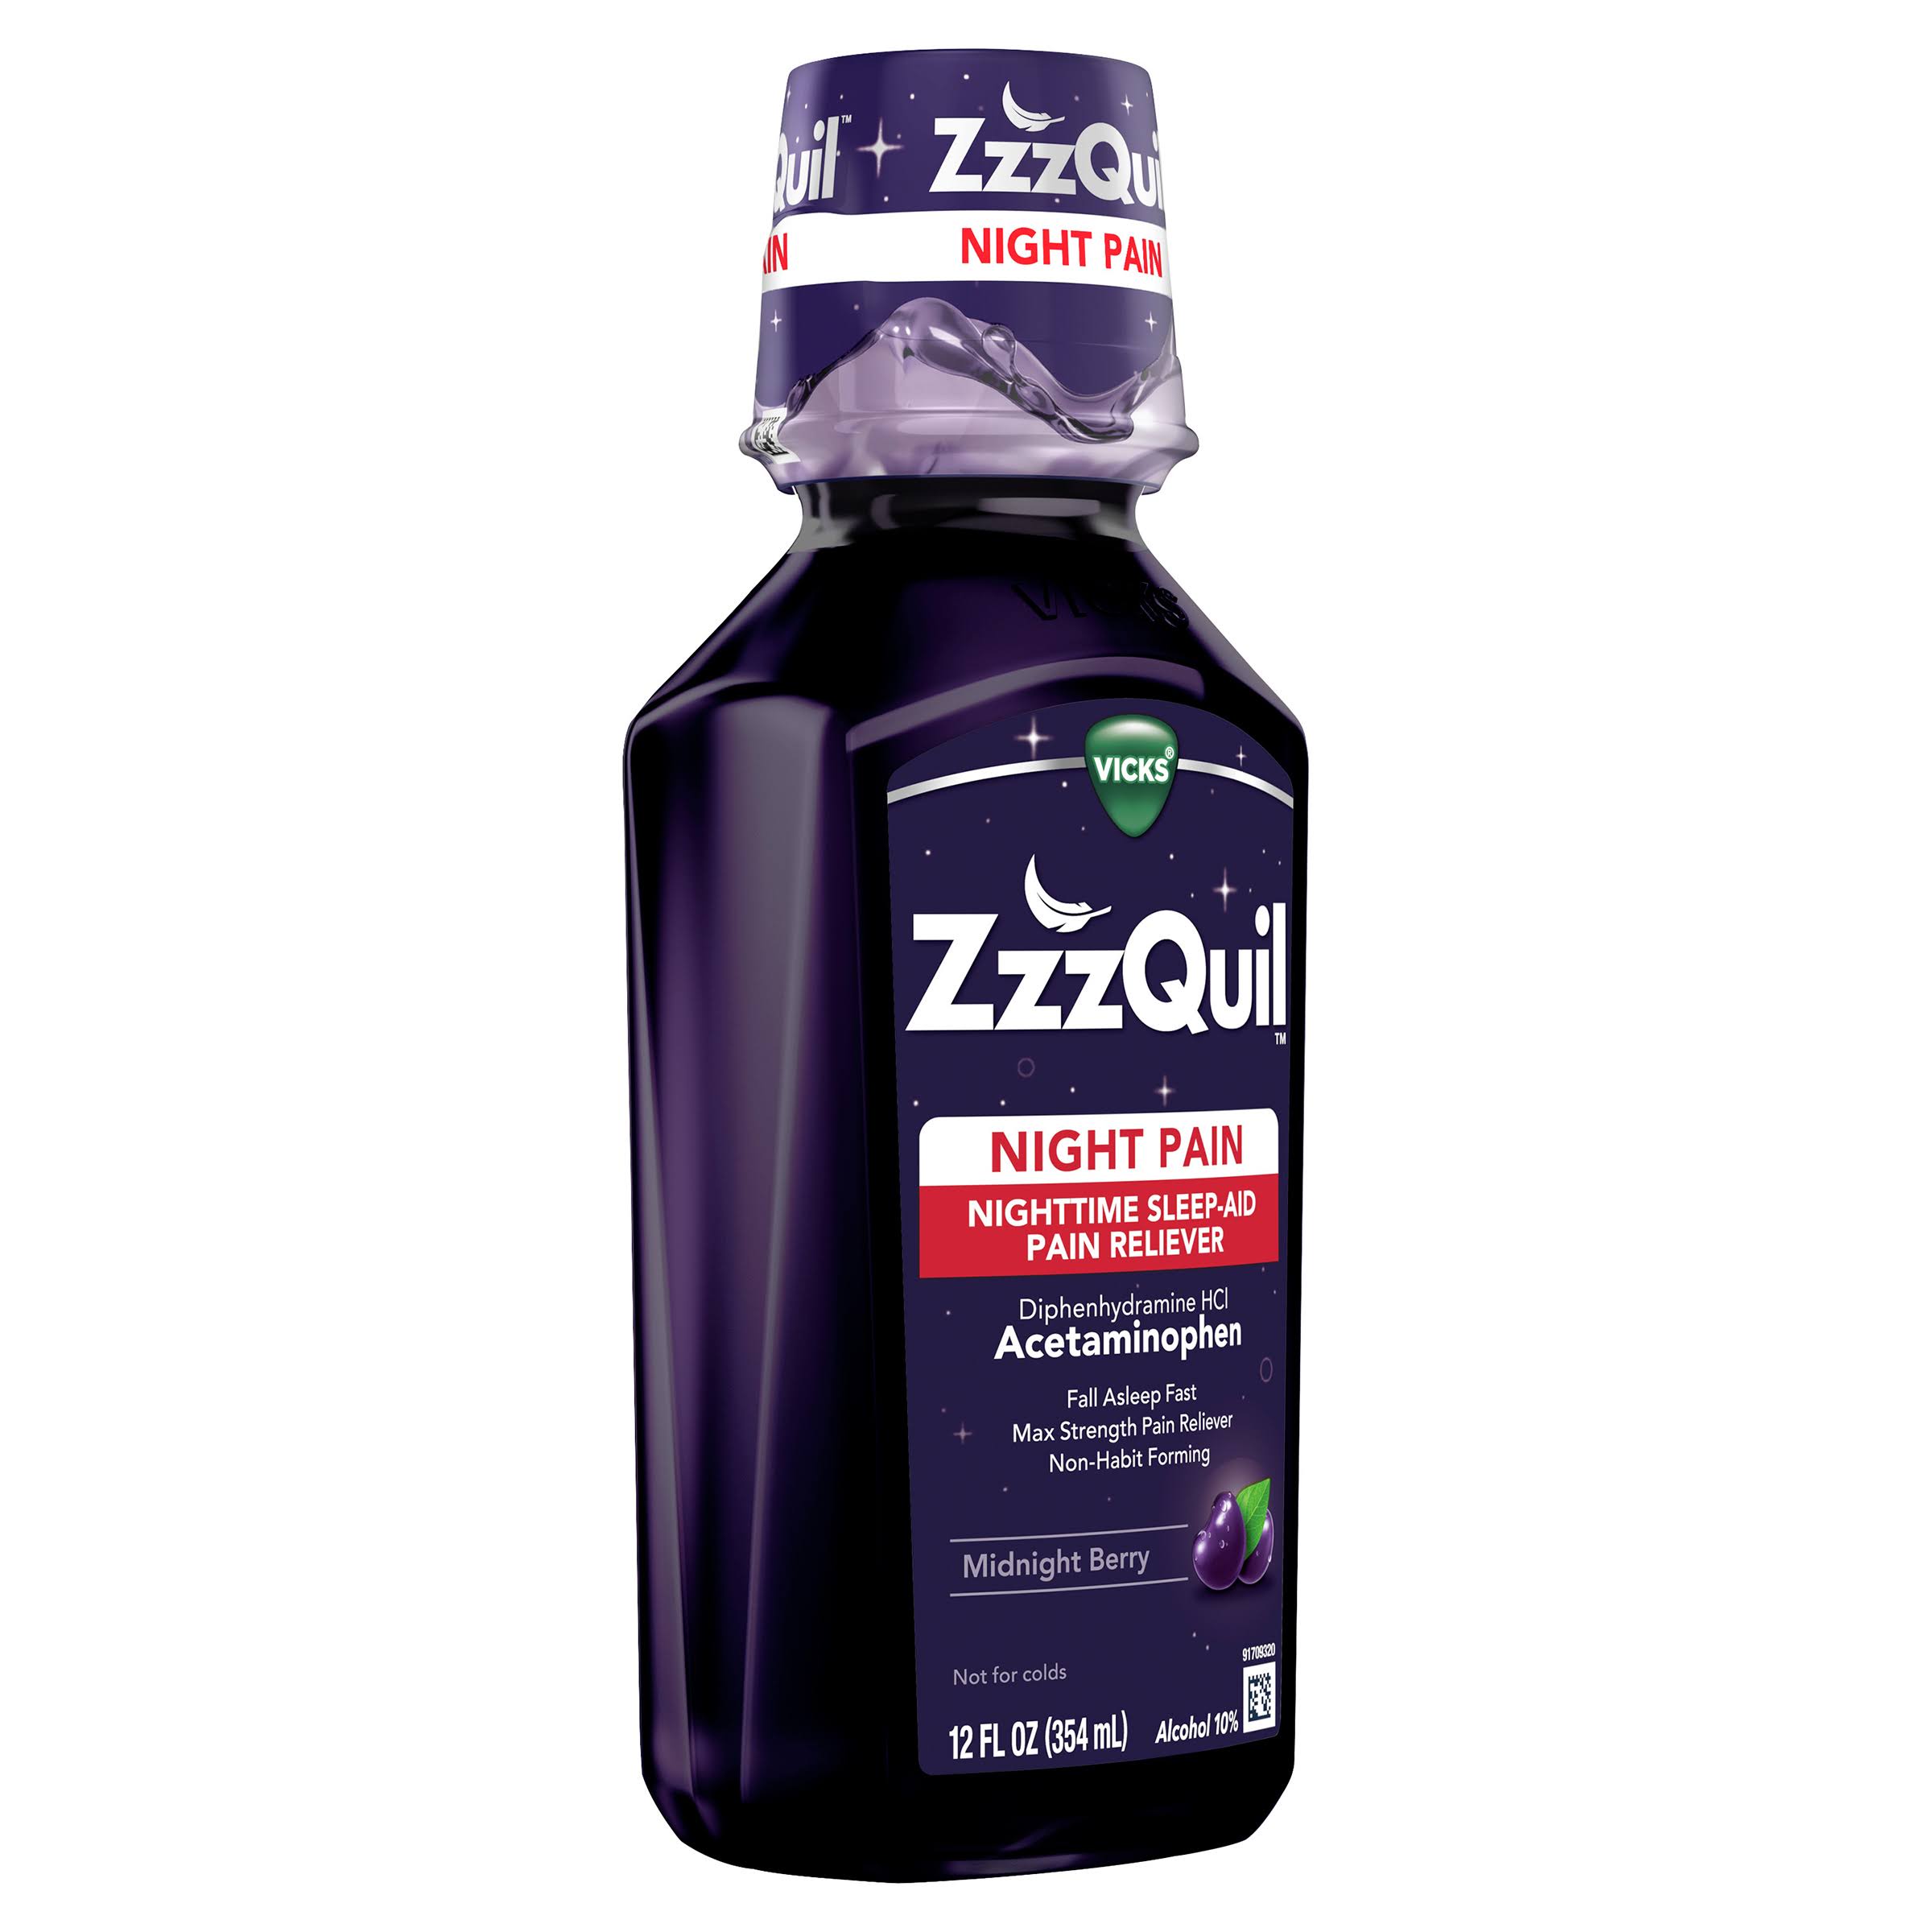 Vicks ZzzQuil Nighttime Sleep-Aid Pain Reliever, Night Pain, Midnight Berry - 12 fl oz